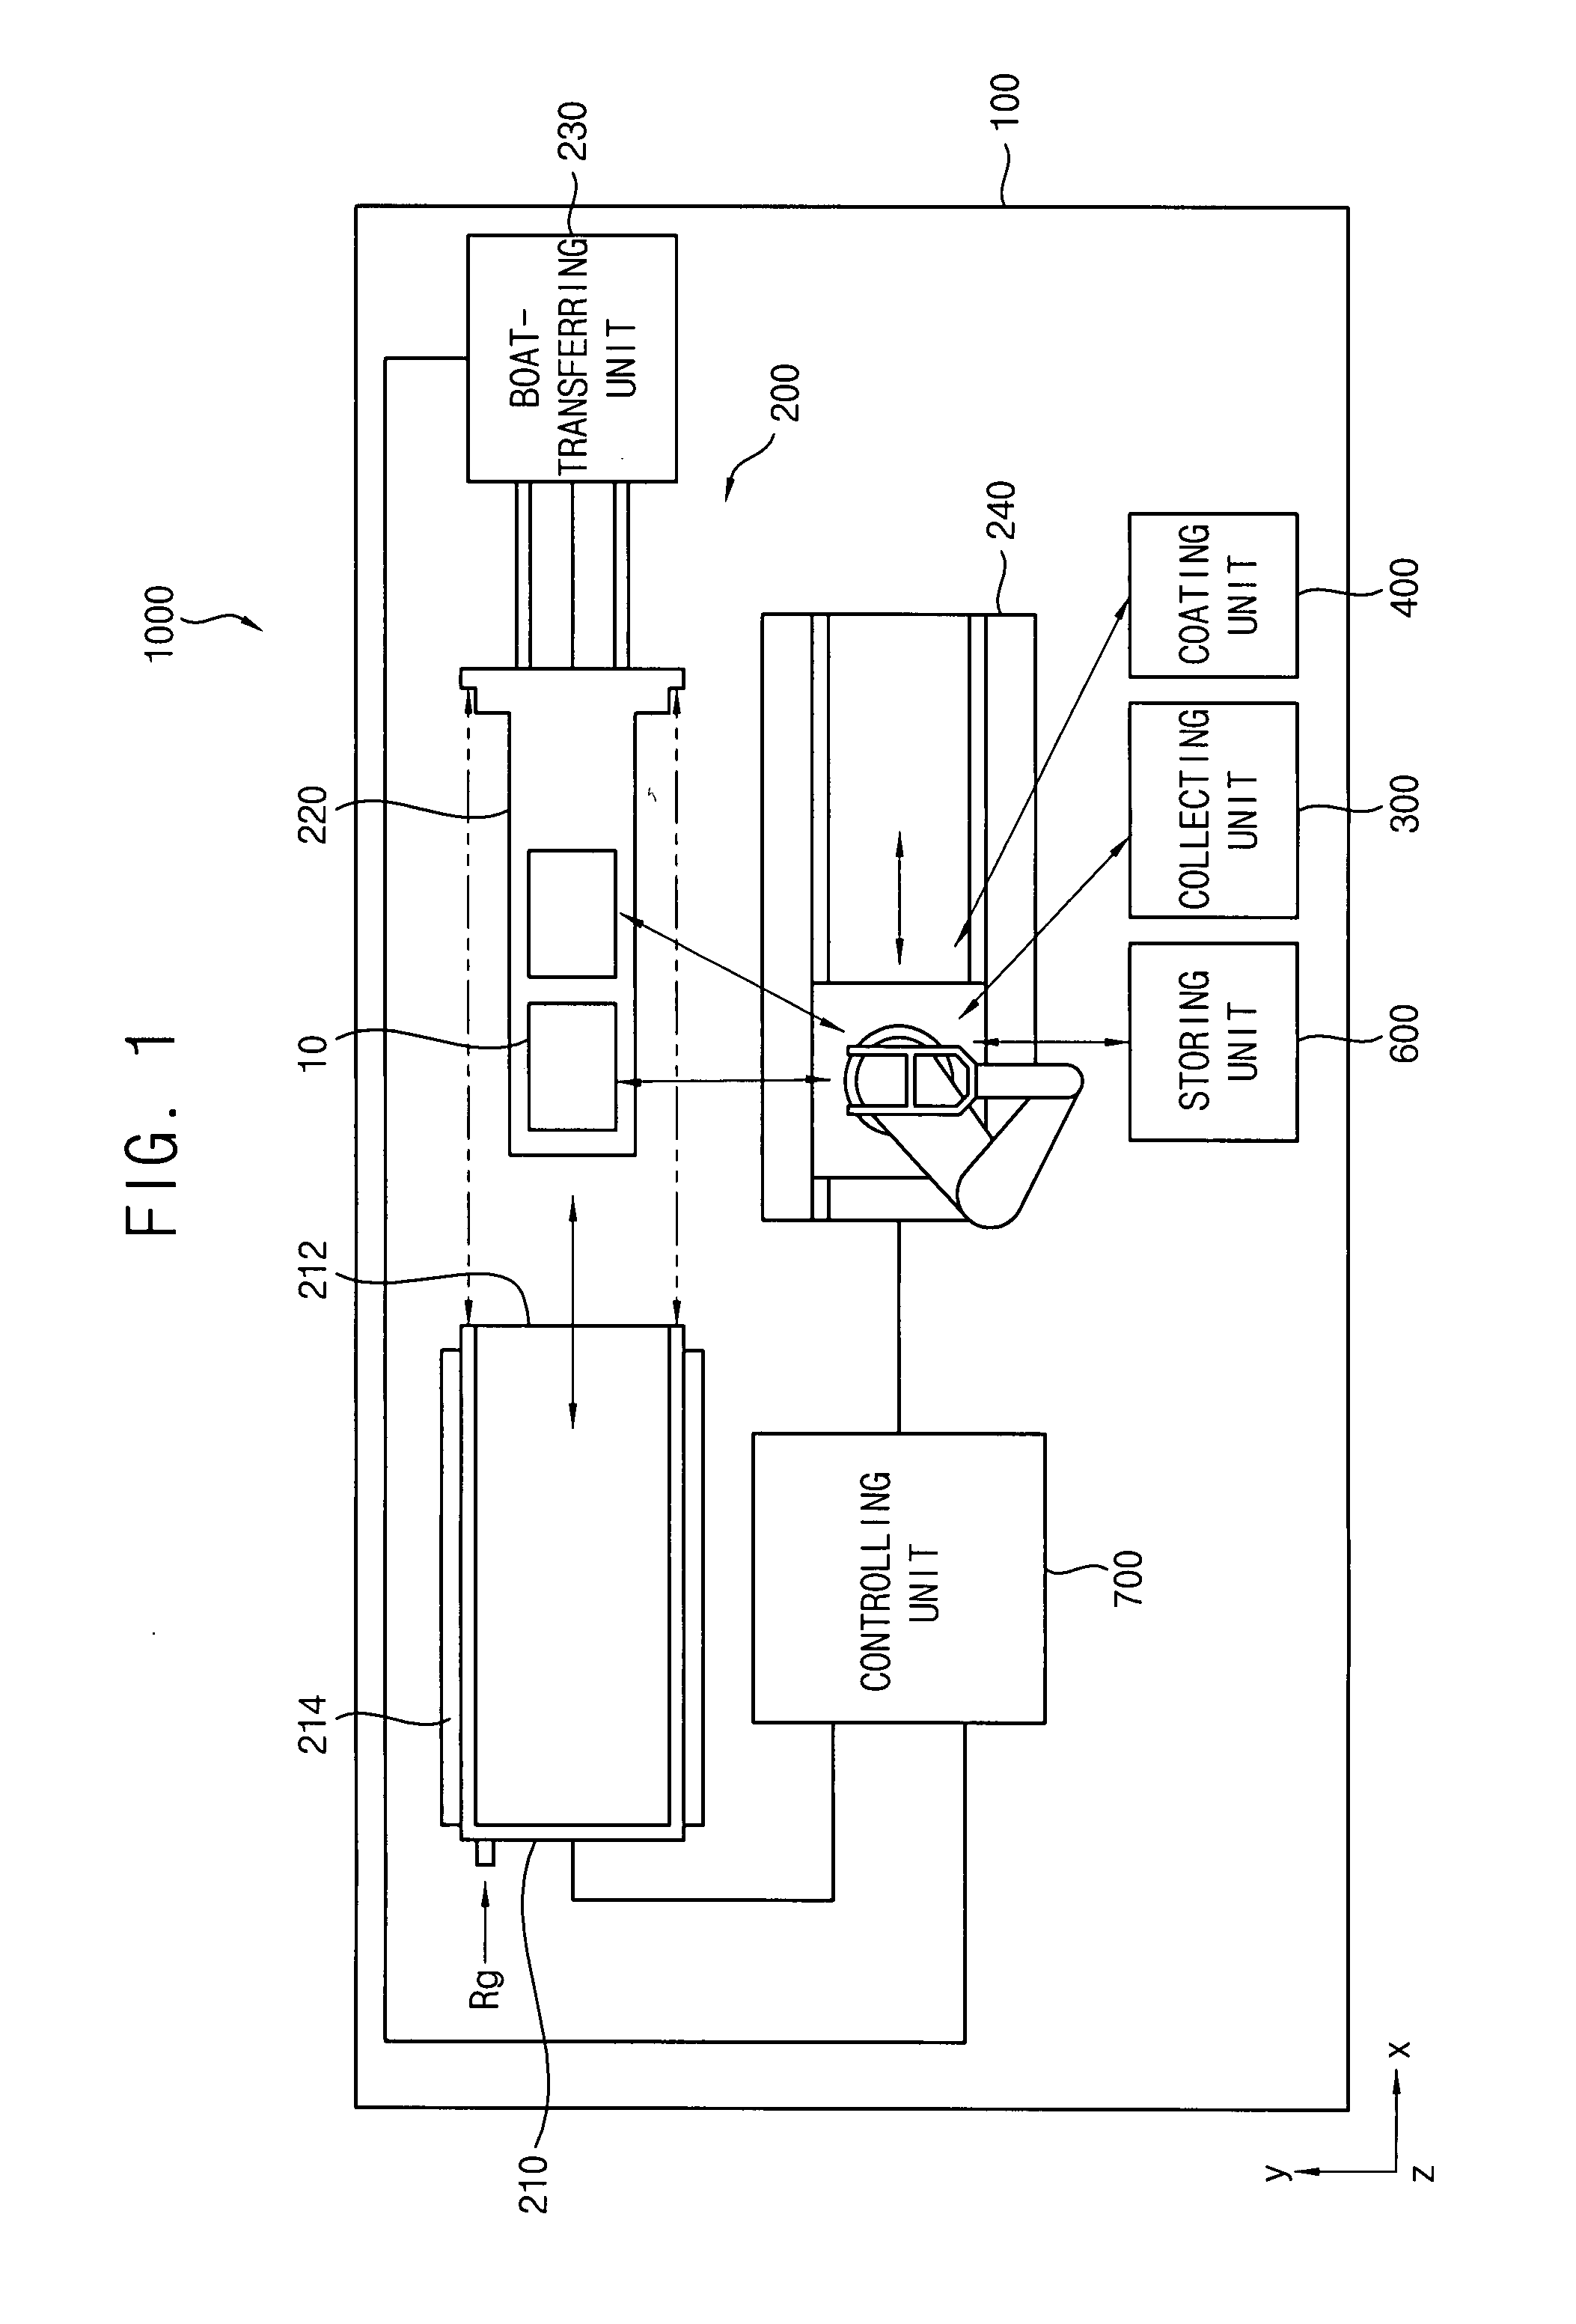 Method of manufacturing a carbon nanotube, and apparatus and system for performing the method